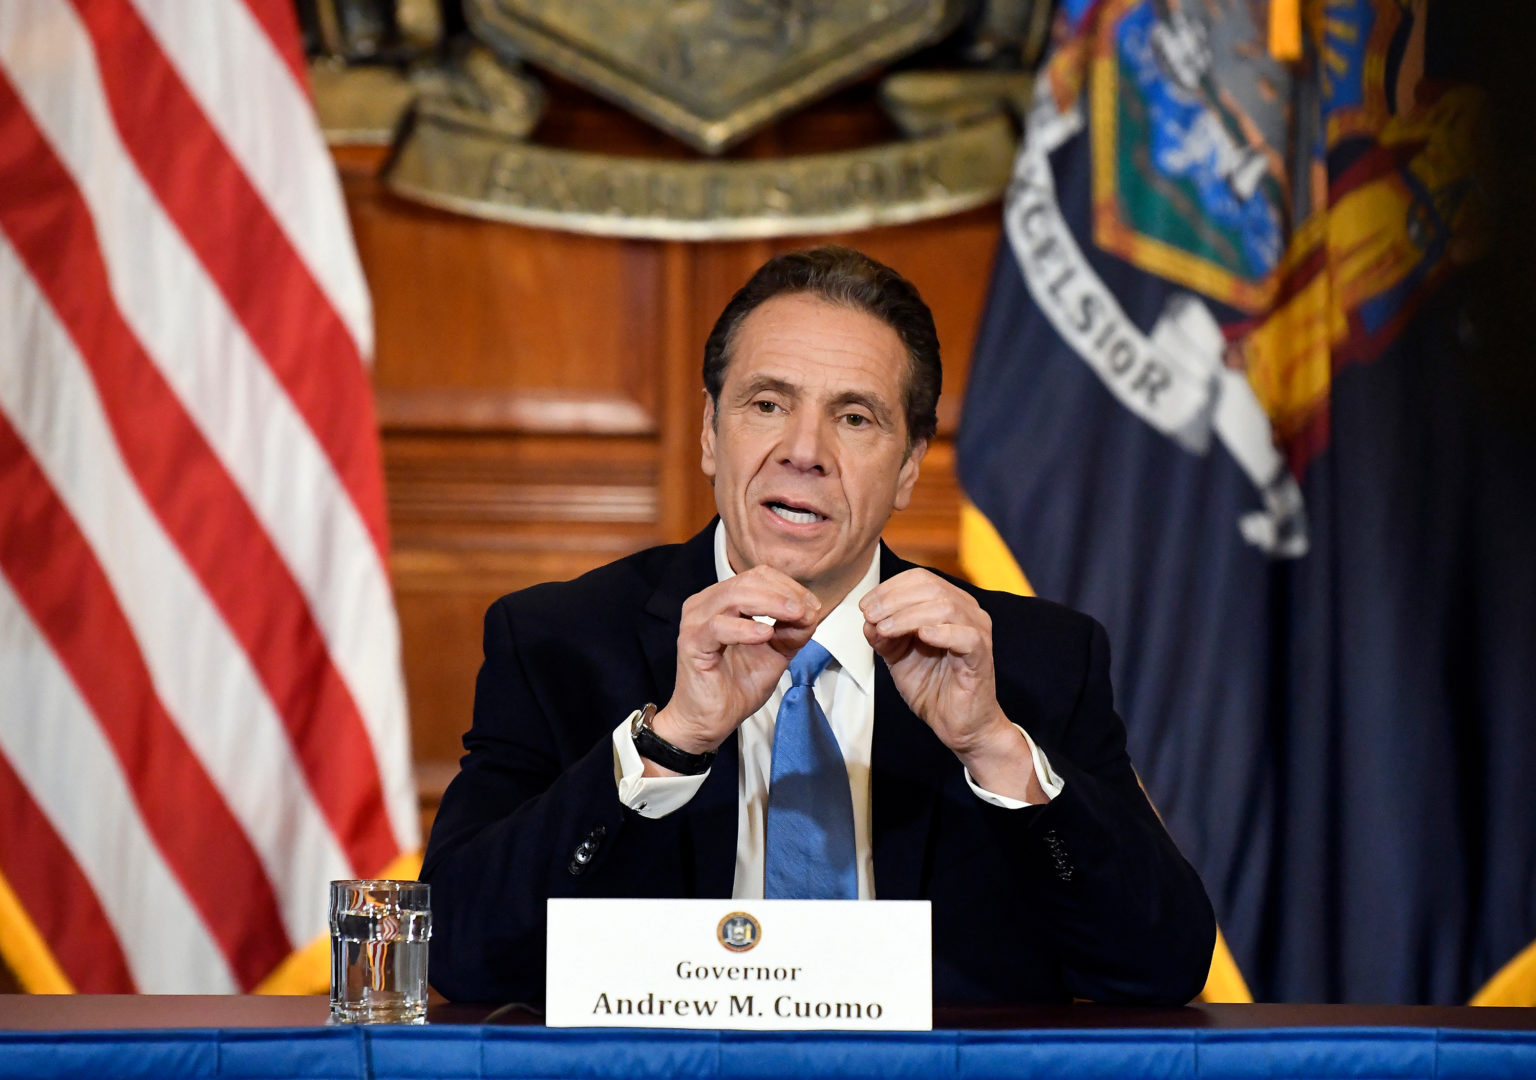 Investigation Into Accusations Against Ny Governor Andrew Cuomo Concludes